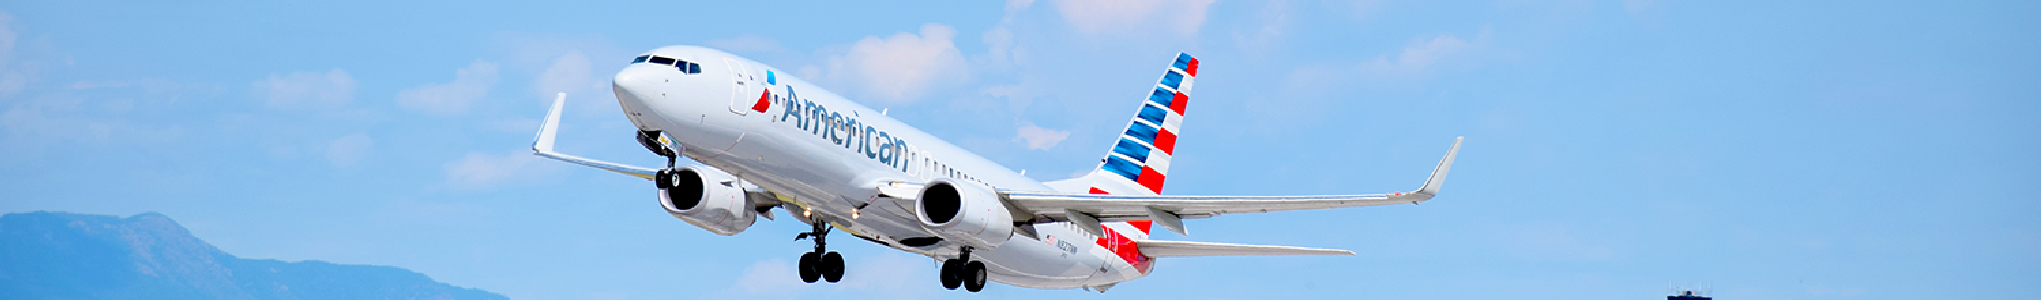 American Airlines Aircraft